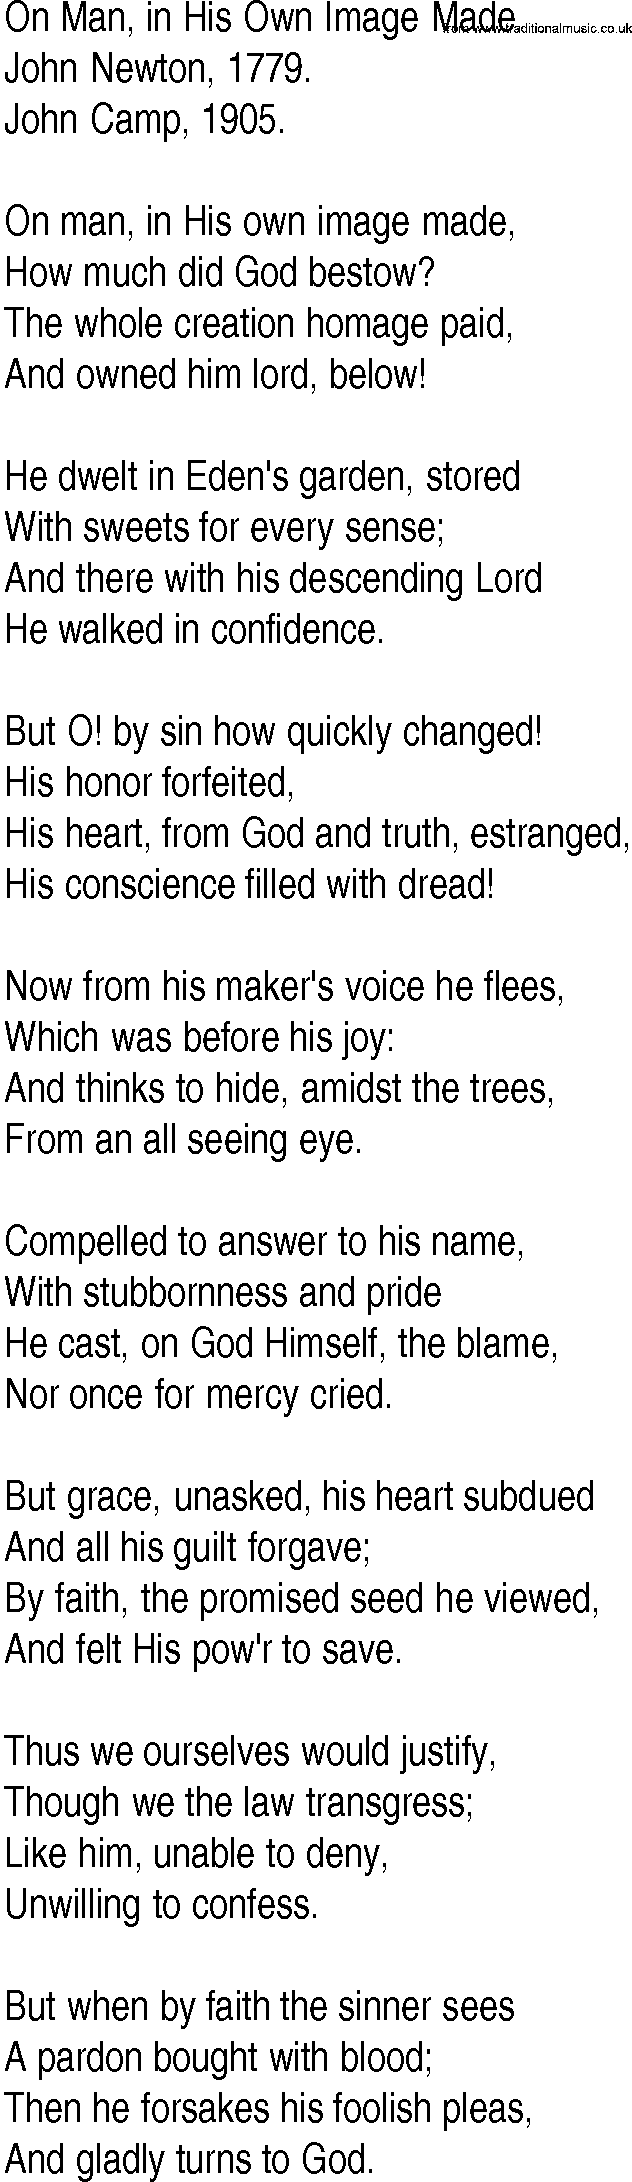 Hymn and Gospel Song: On Man, in His Own Image Made by John Newton lyrics